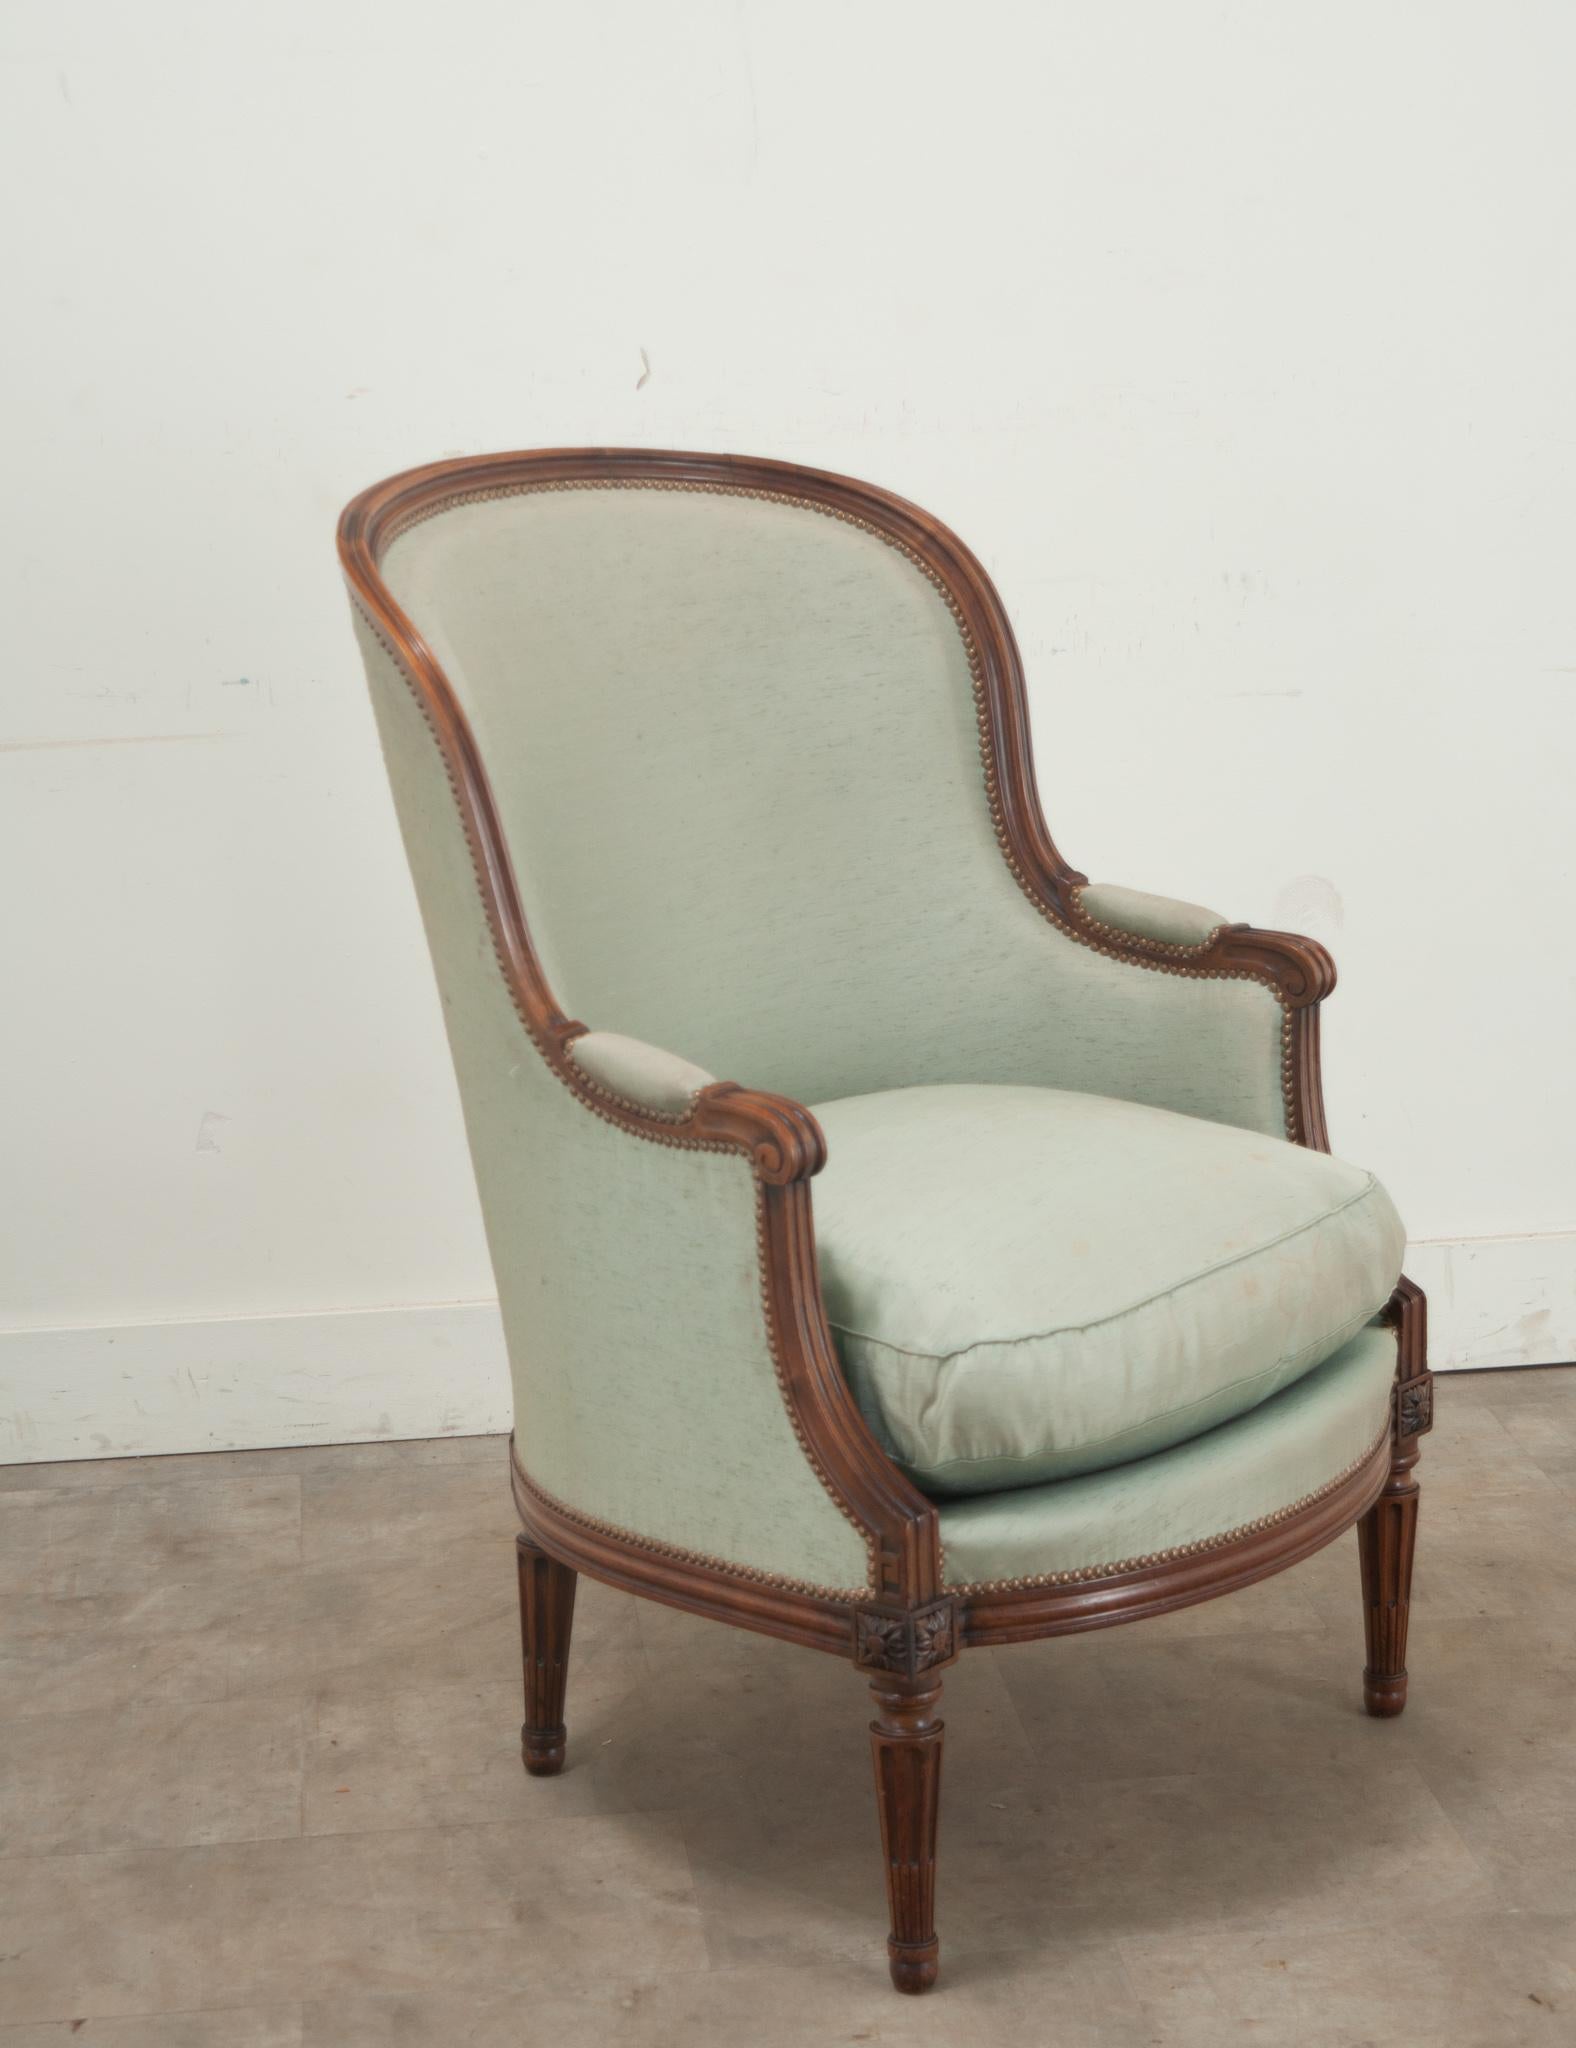 A single French Louis XVI style walnut bergere. This barrel back bergere has a walnut frame and is upholstered in a worn silk green upholstery (there is some staining on the seat cushion) with a brass nailhead trim. Louis XVI style carvings are seen